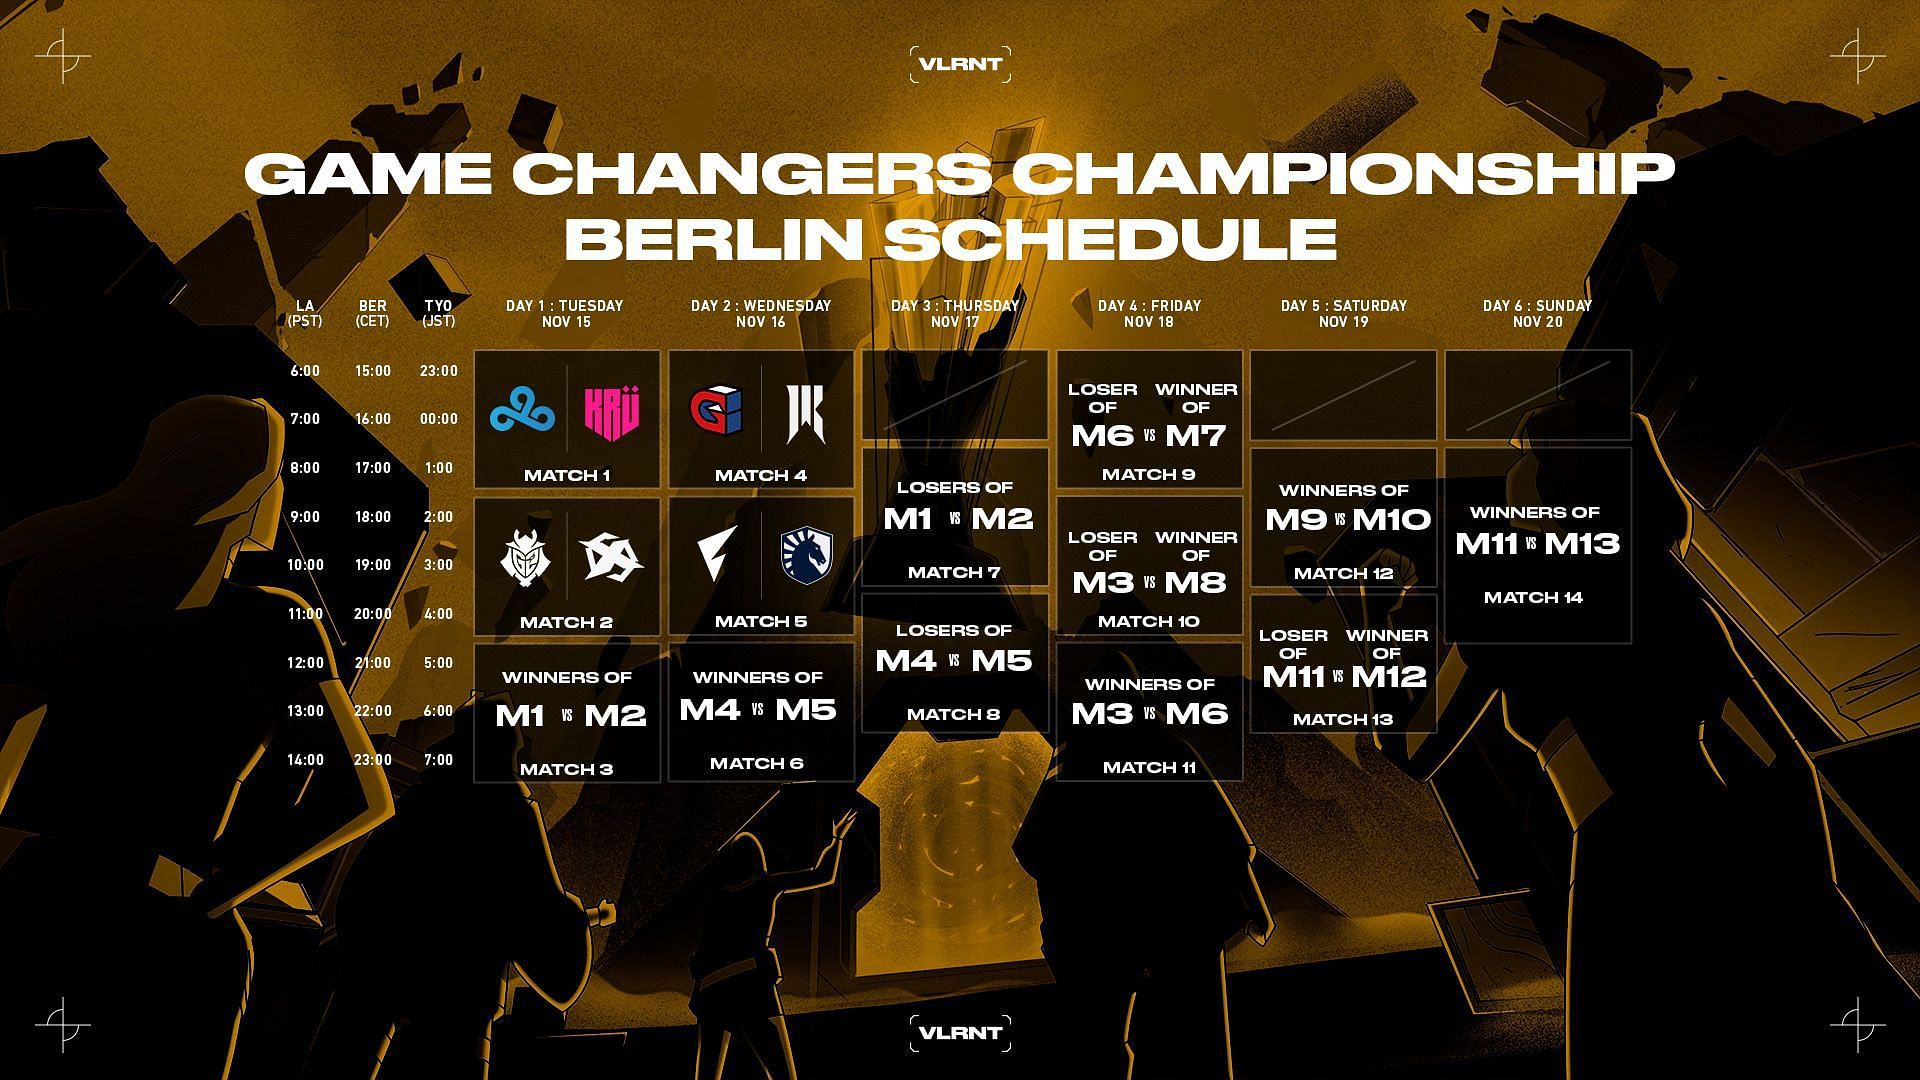 Game Changers Championship Berlin Schedule (Image via Riot Games)